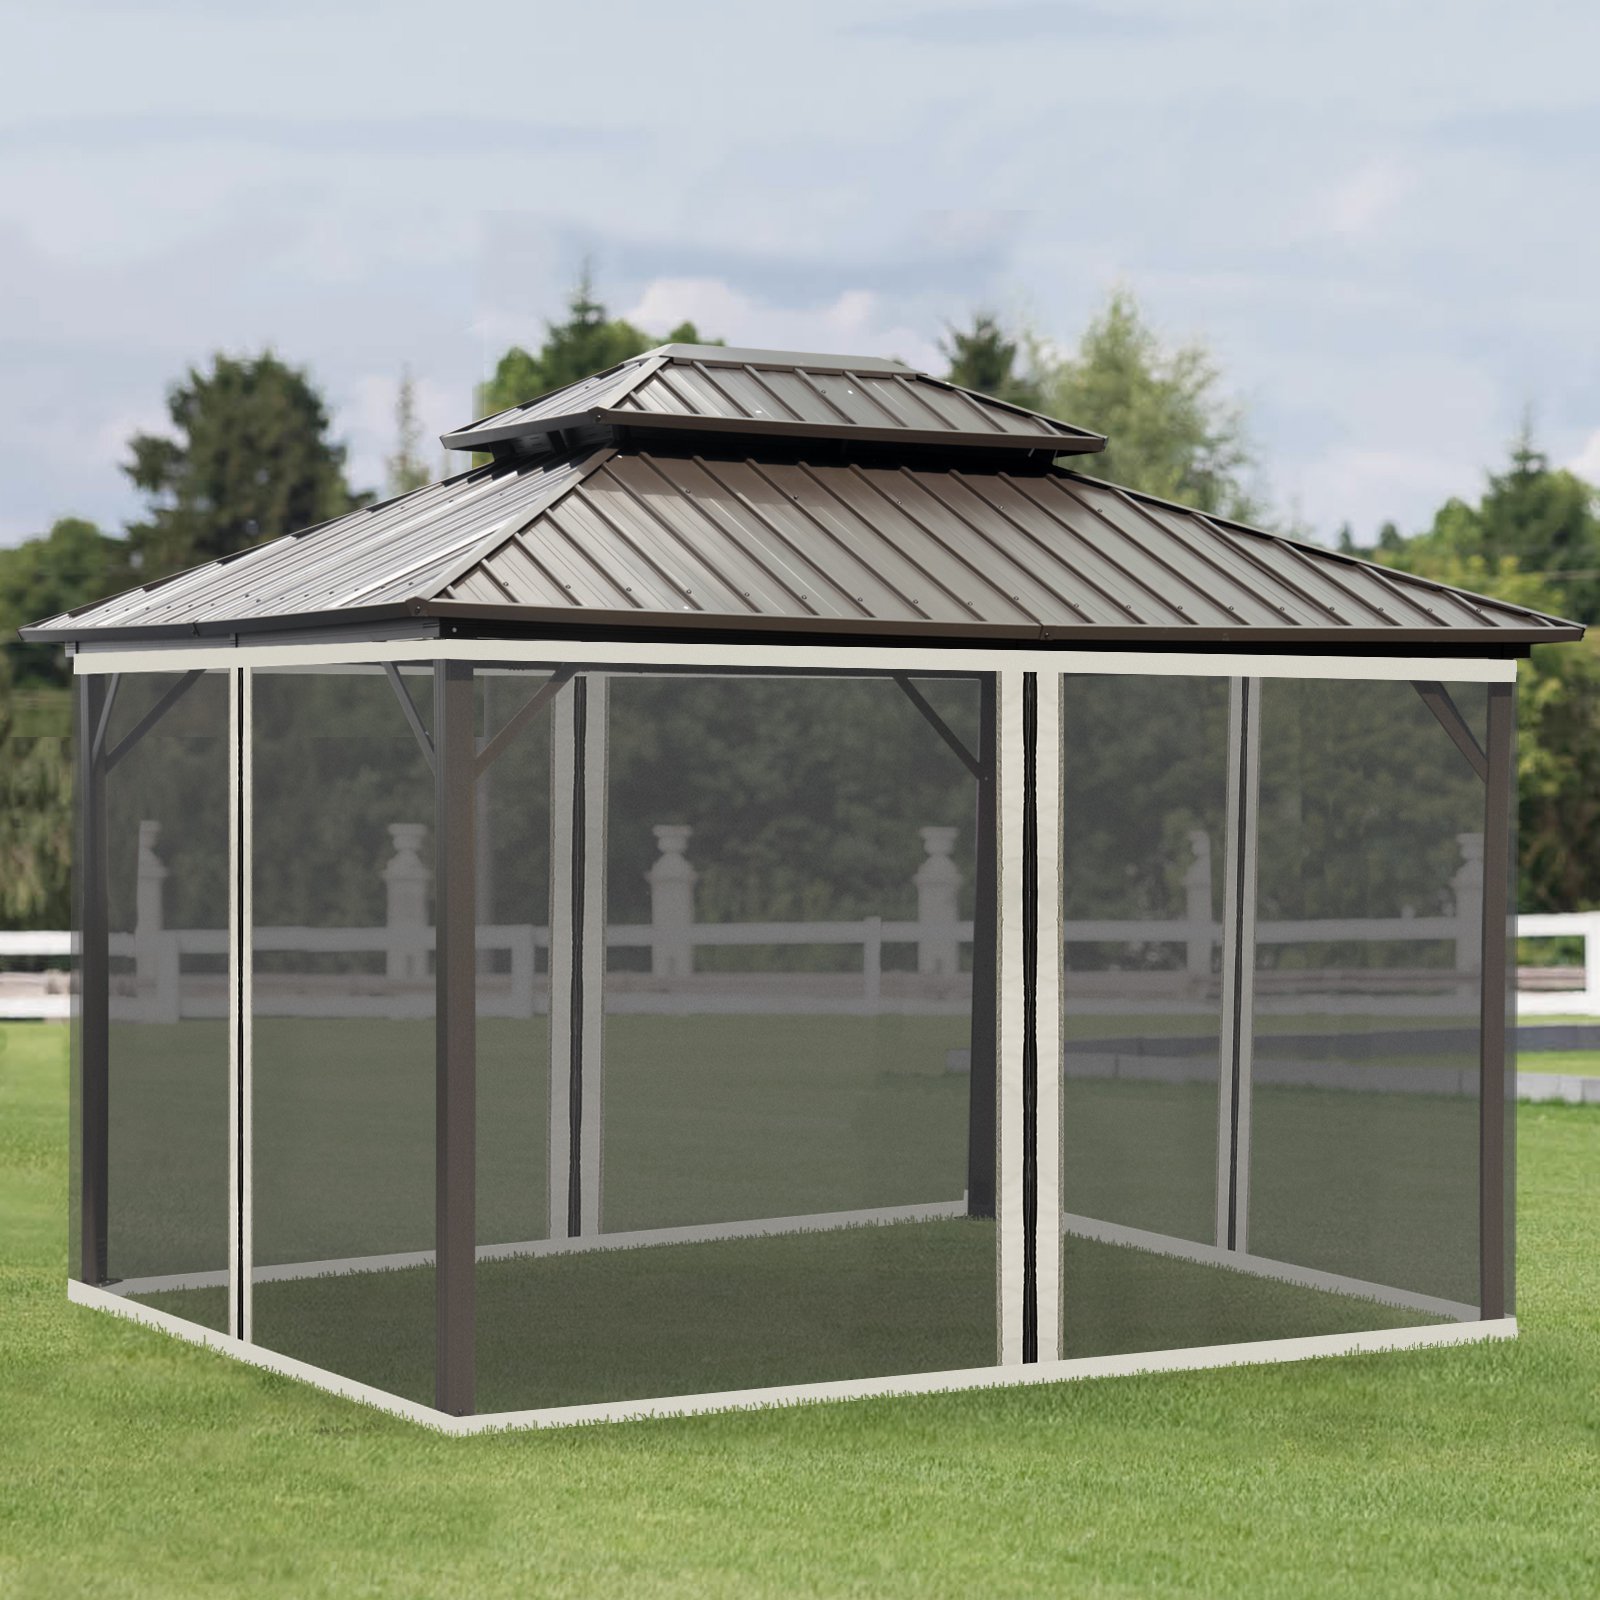 Outsunny Replacement Mesh Mosquito Netting Screen Walls for 10' x 13' Patio Gazebo, 4-panel Sidewalls with Zippers (Wall Only, Canopy Not Included)